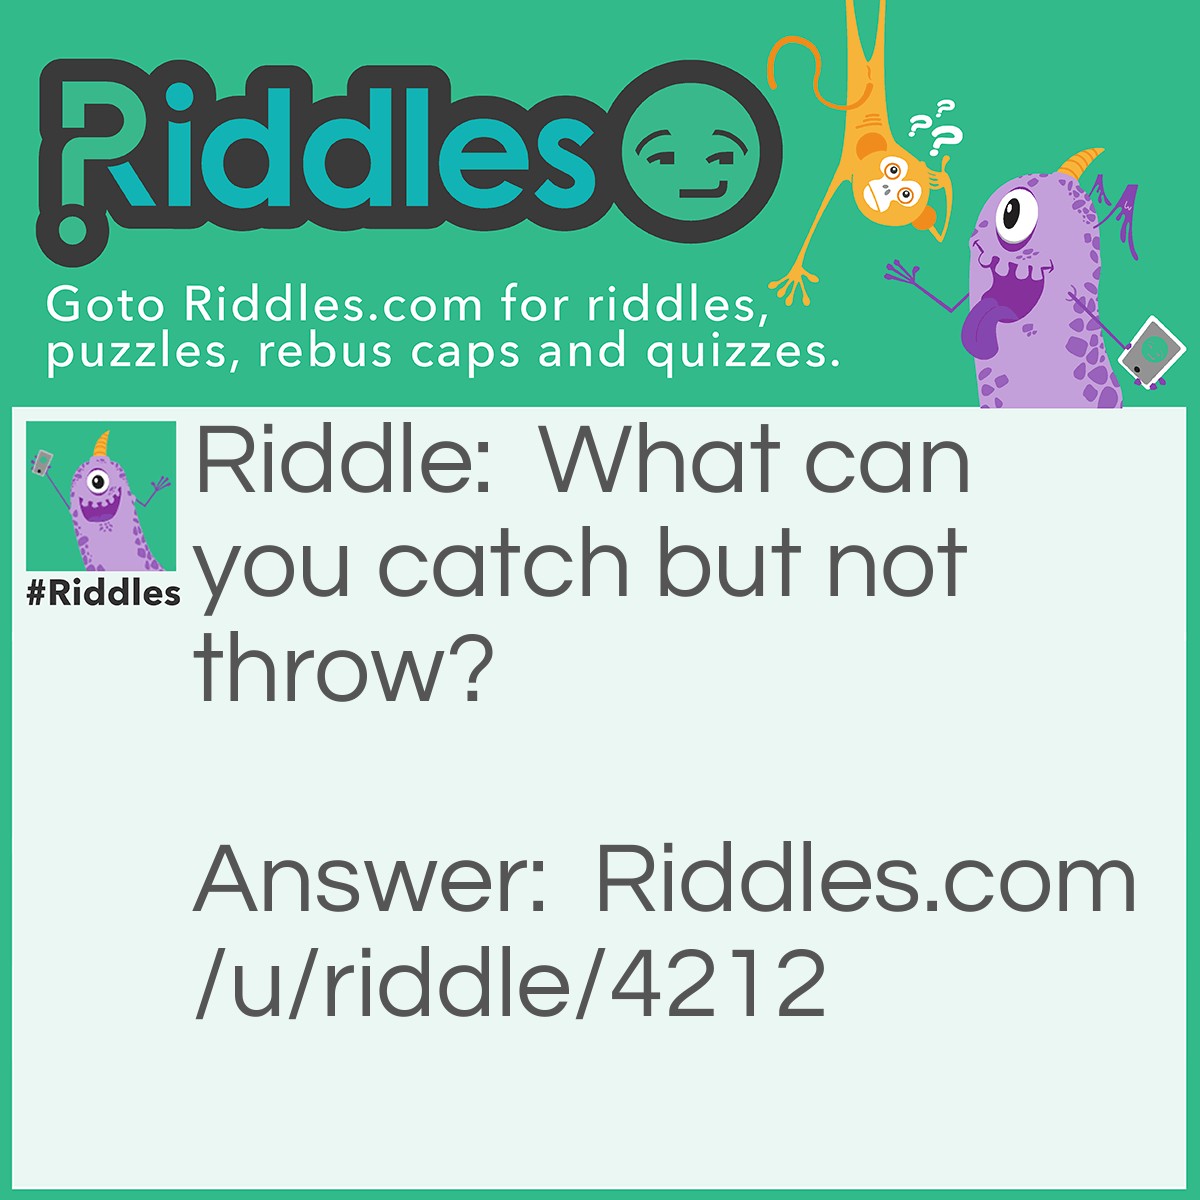 Riddle: What can you catch but not throw? Answer: A Cold!